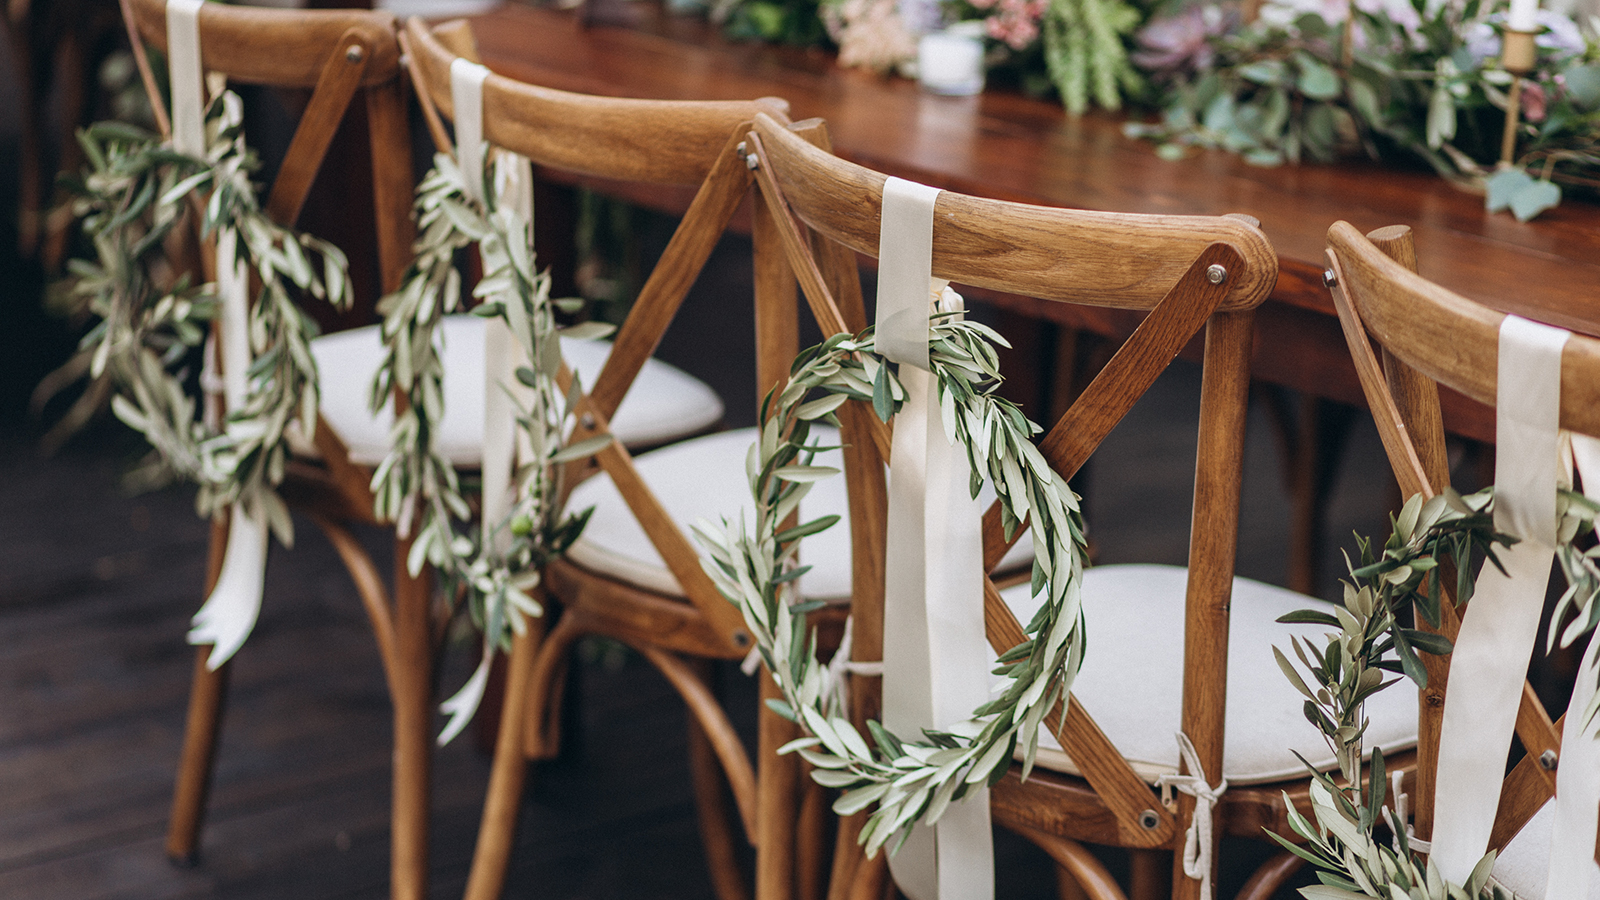 Boho wedding chair with eco decor for guests.